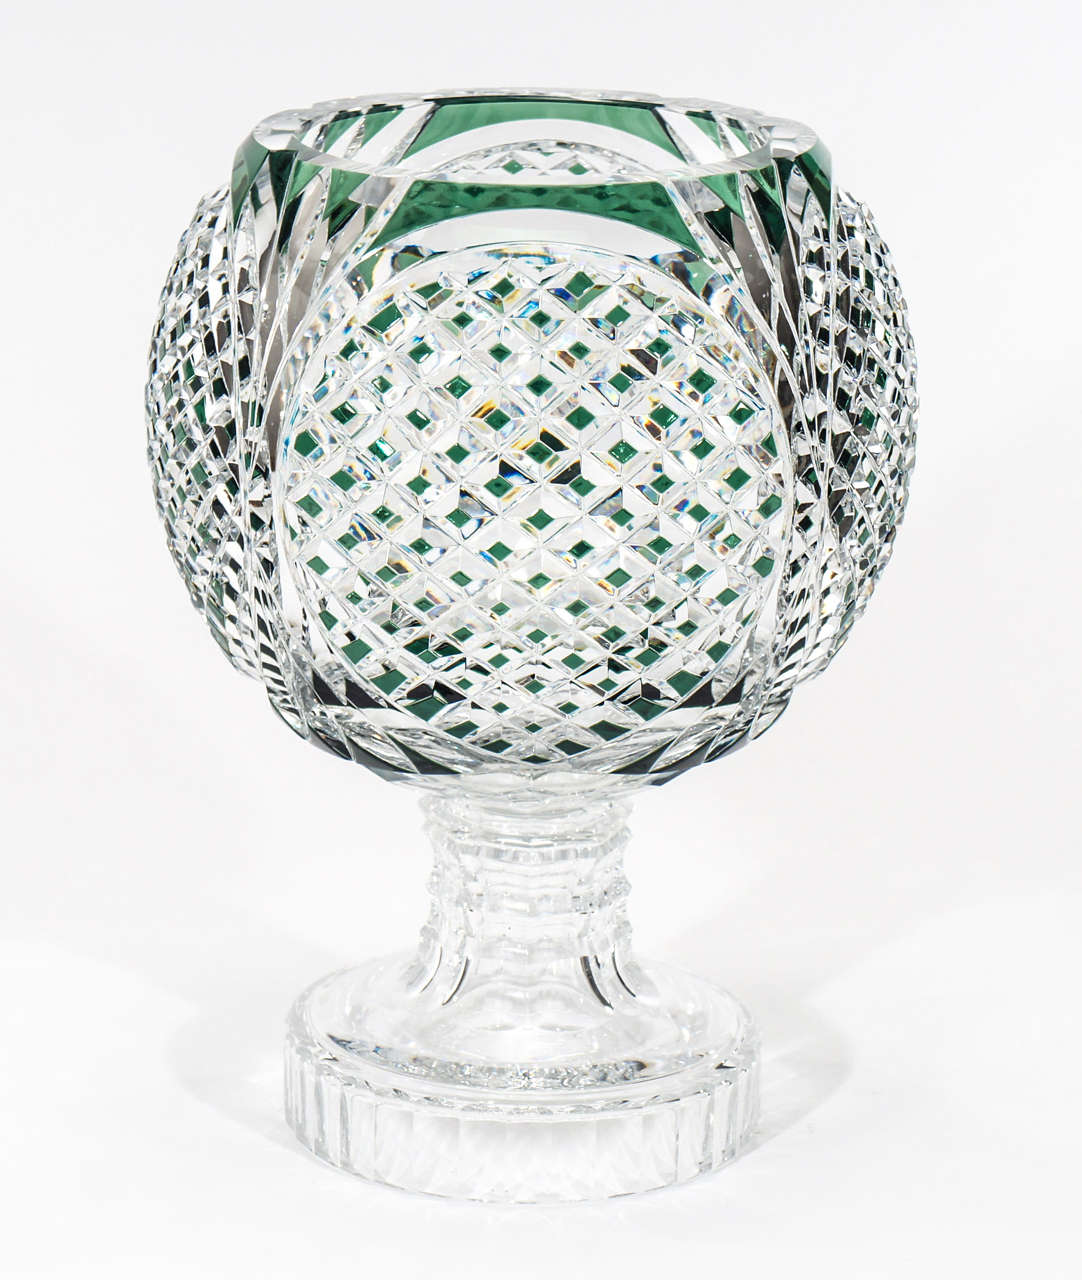 This is a dramatic, large and beautifully proportioned crystal centerpiece or vase signed by Val St. Lambert. The hand blown crystal is overlaid in emerald green and cut to clear and a strong geometric pattern. The 14